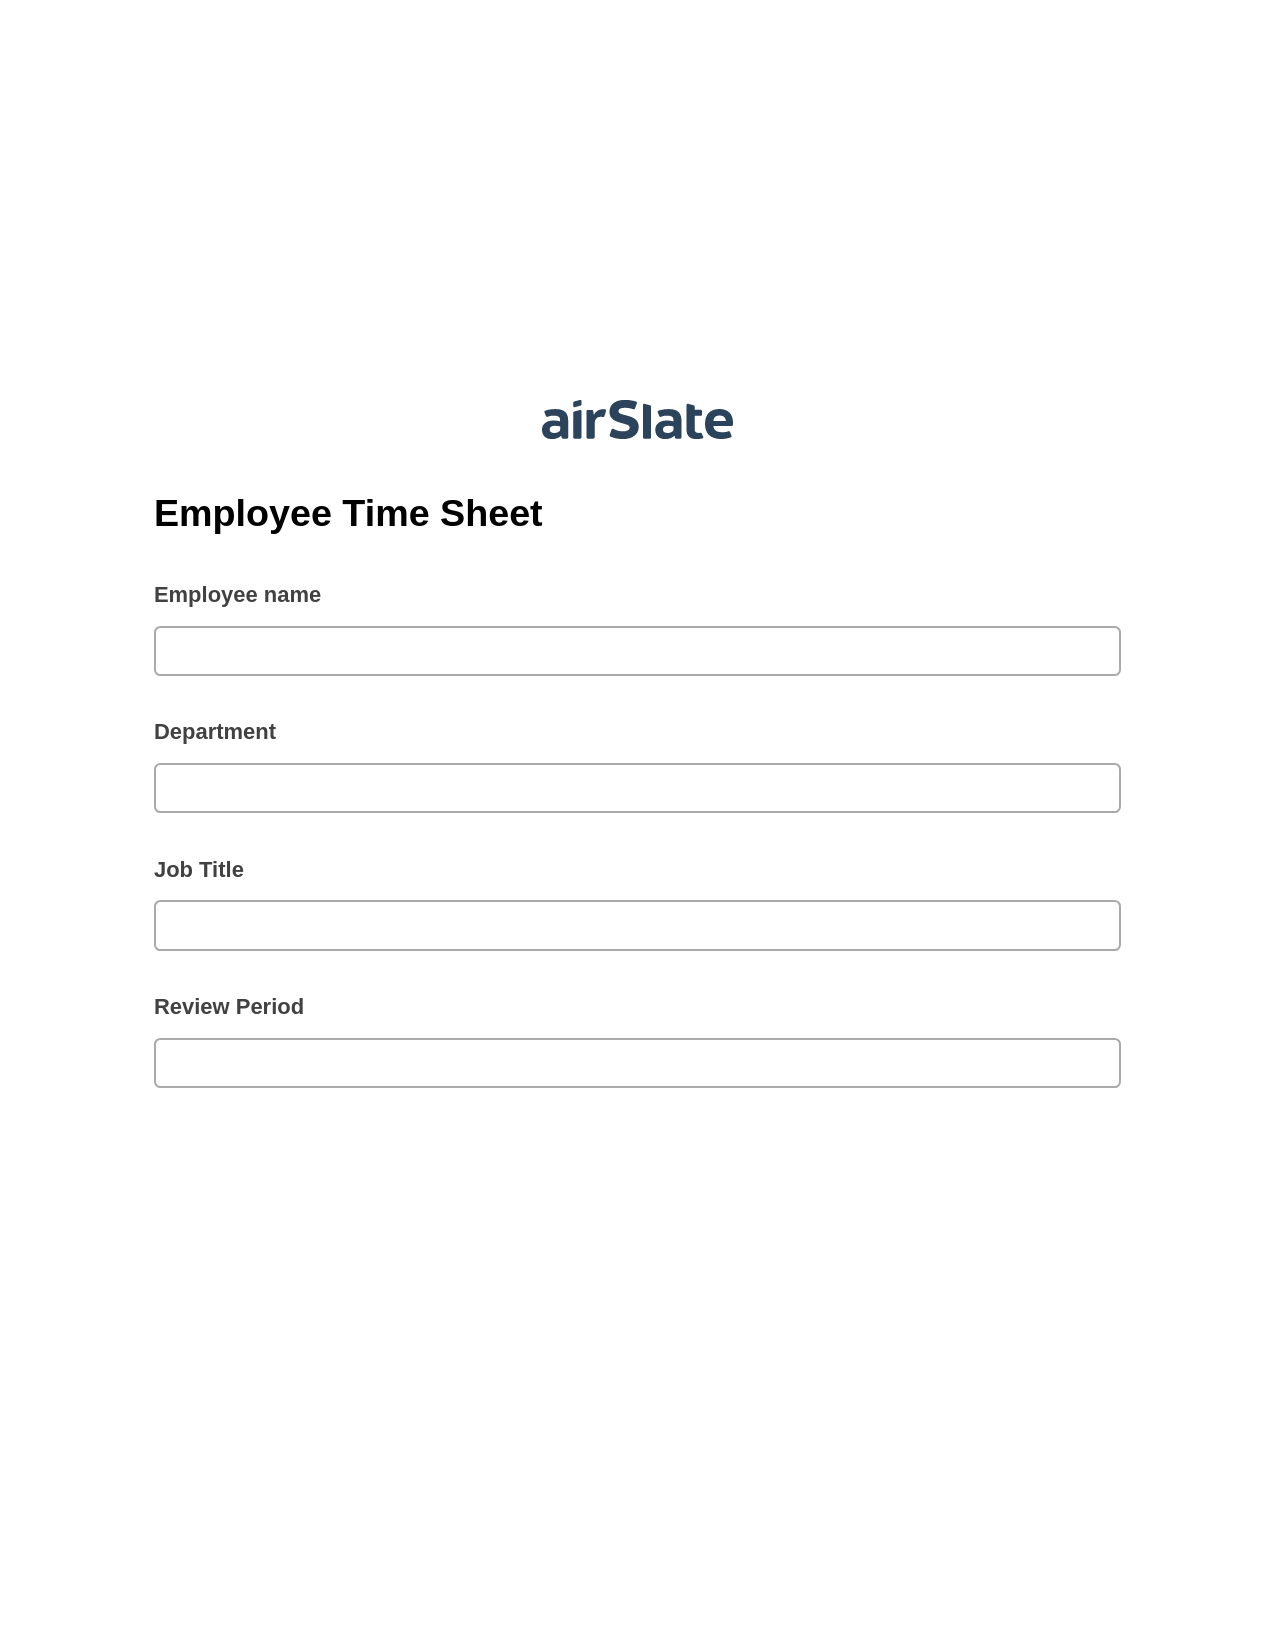 Employee Time Sheet Pre-fill from MS Dynamics 365 Records, Create Salesforce Records Bot, Webhook Postfinish Bot